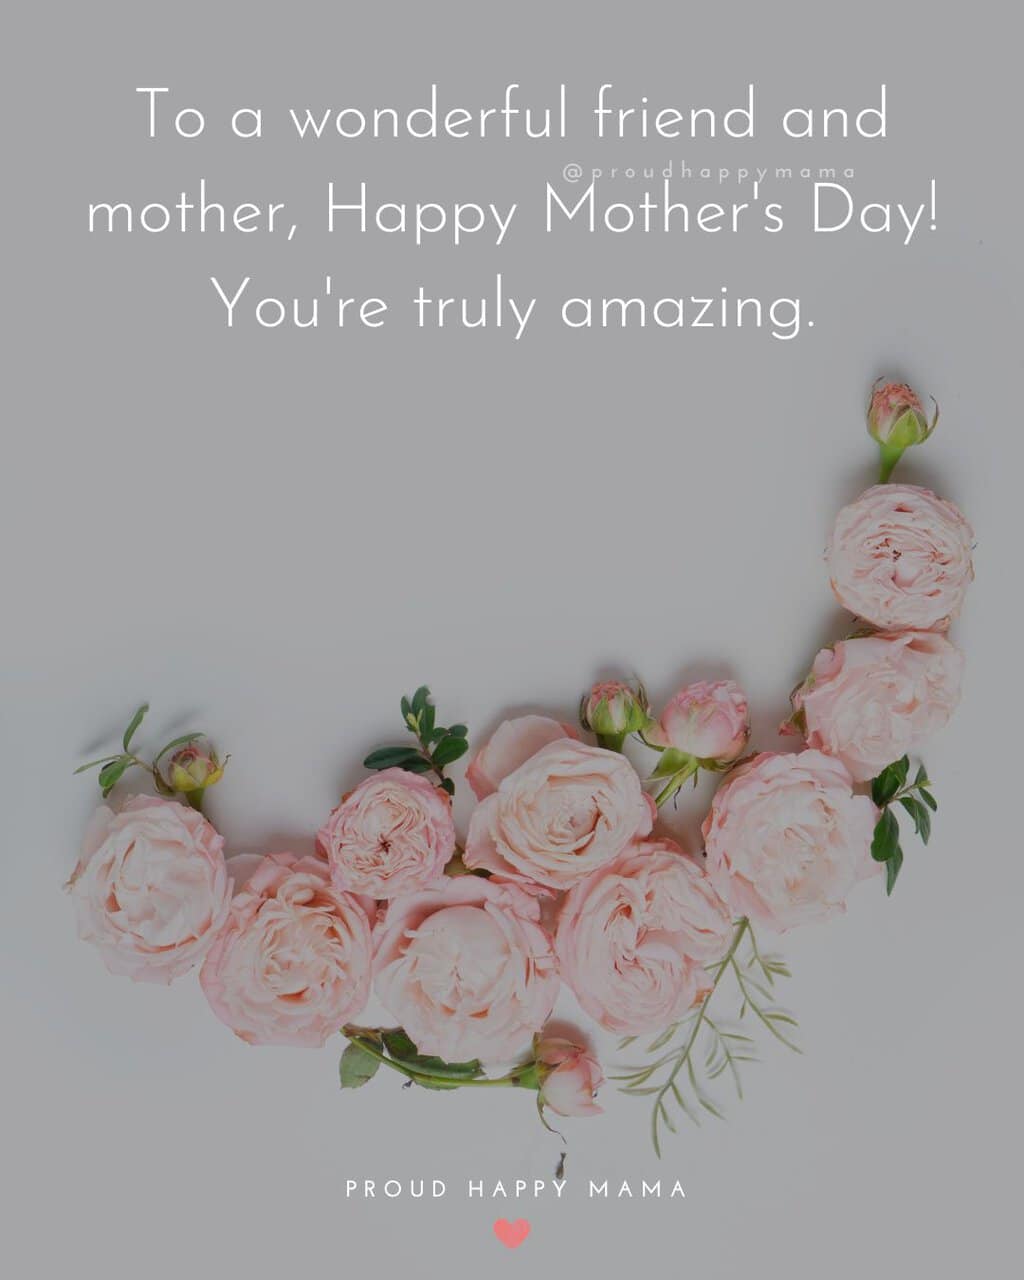 Short Mother's Day Quotes For Friends